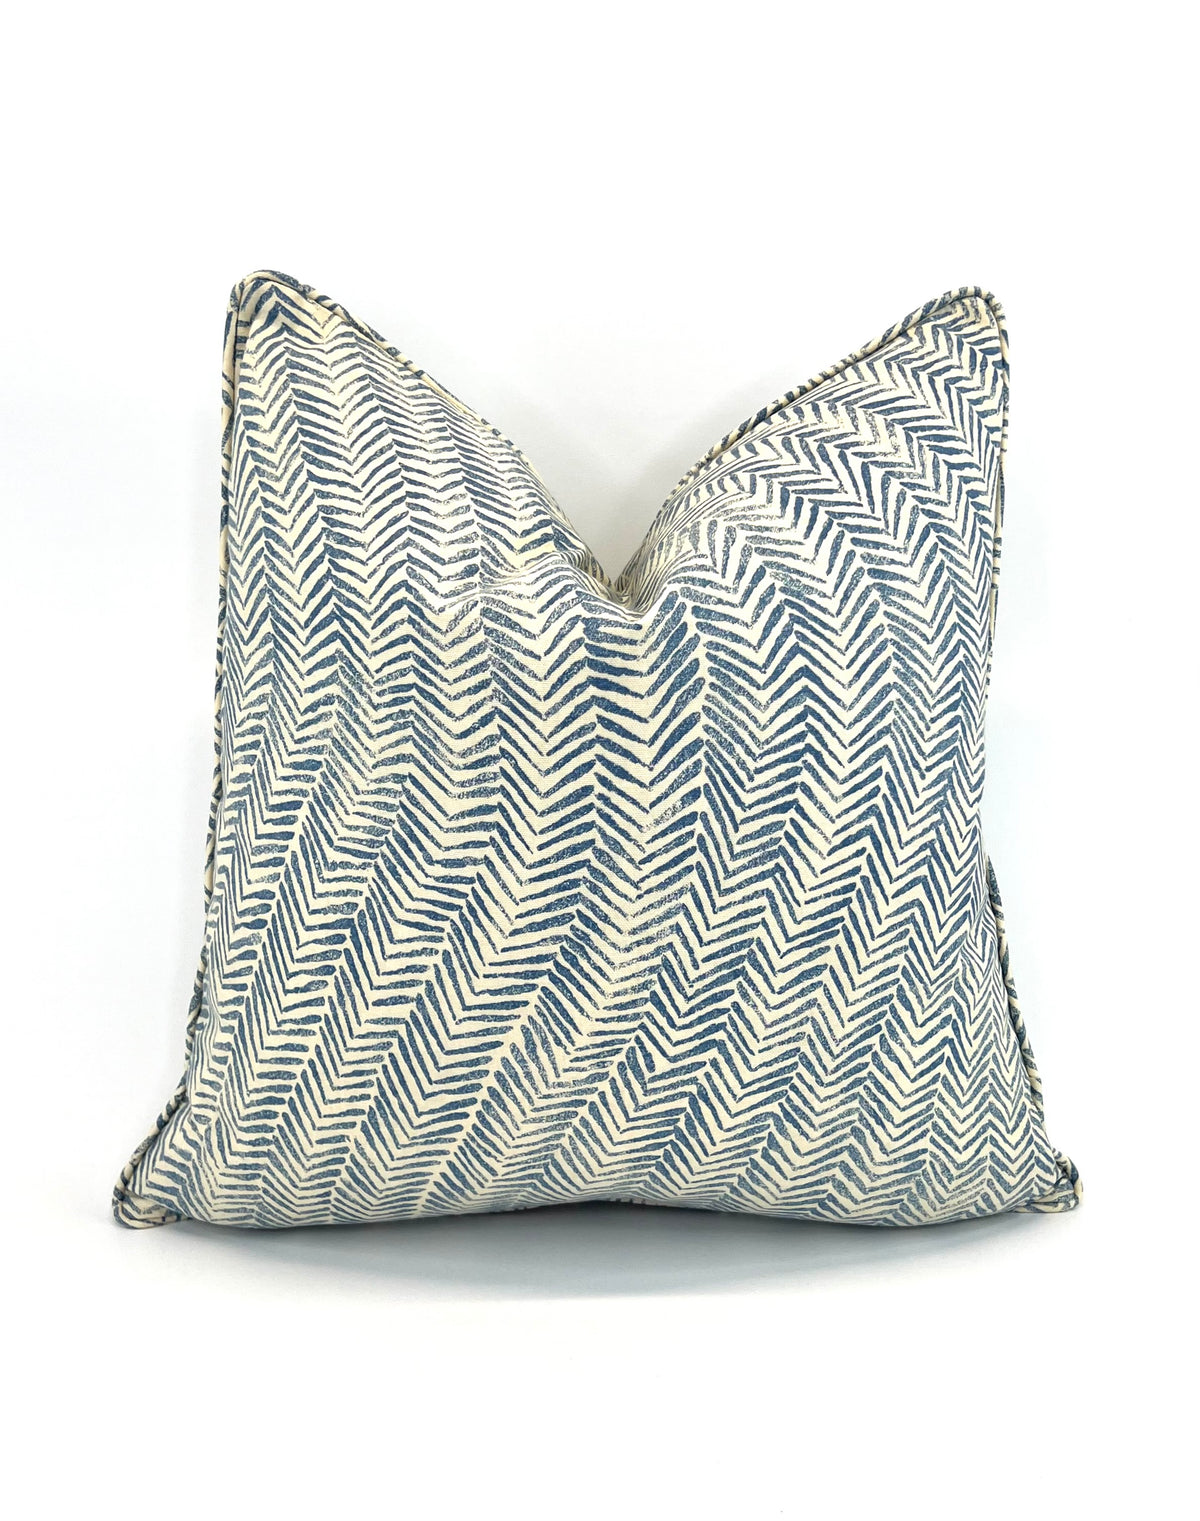 Intoxicating Stripe Blue Fern Decorative Pillow Cover